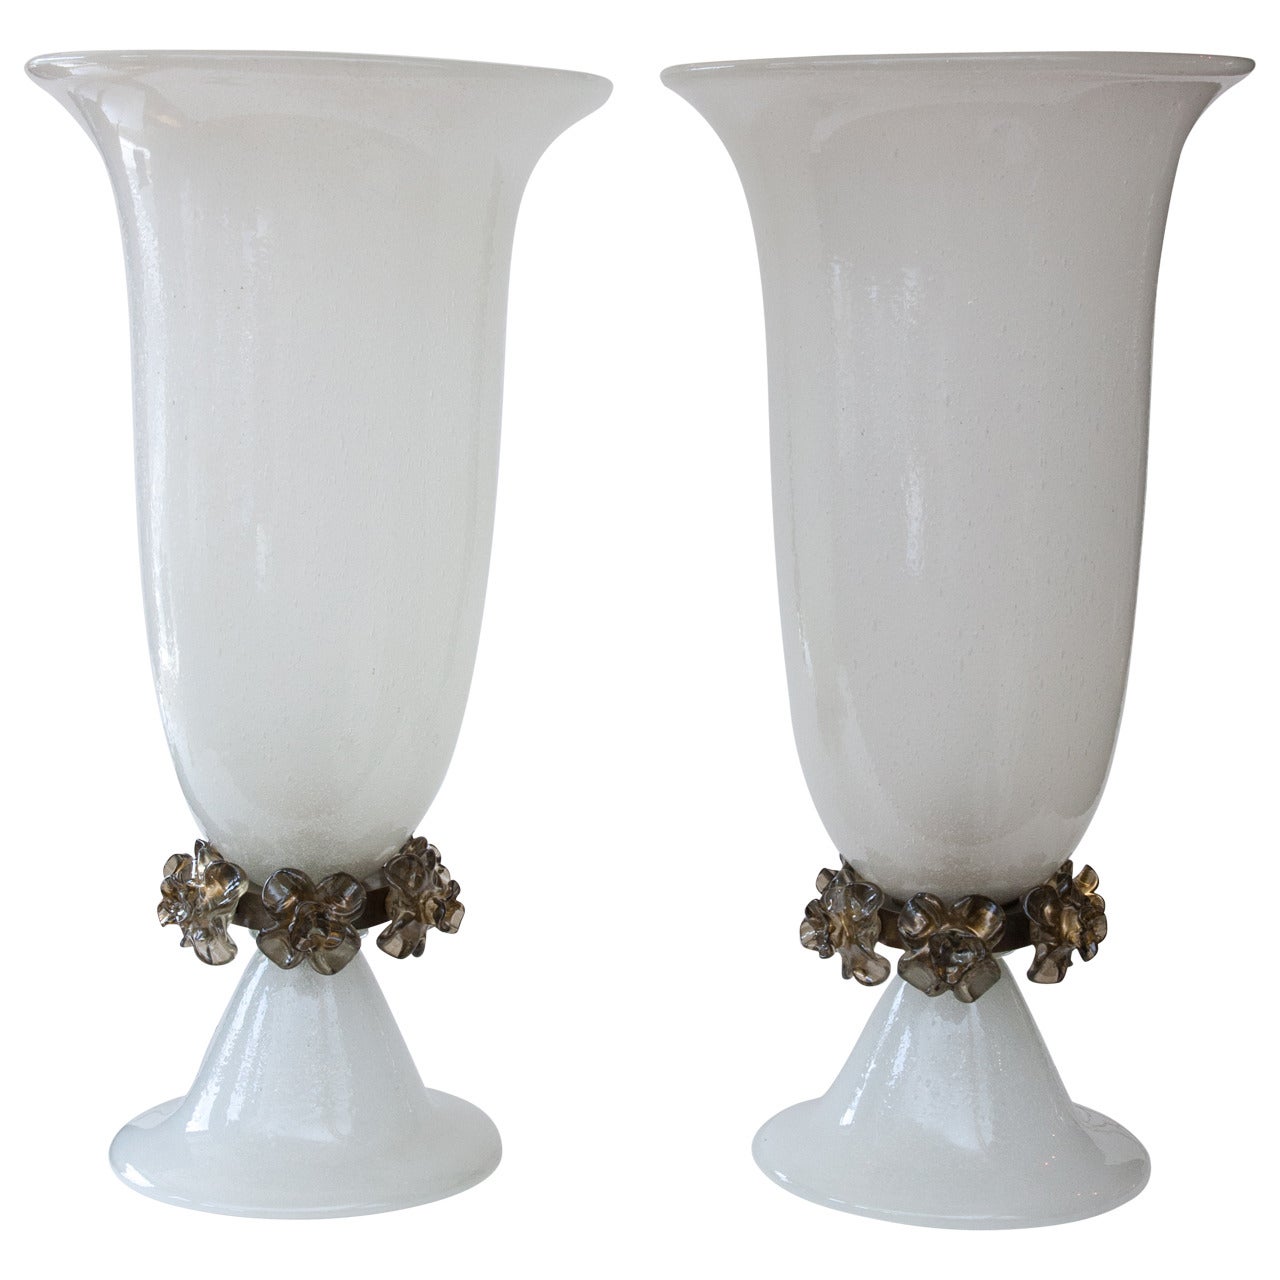 Monumental  and Rare Pair of Vintage Murano Uplight Vases